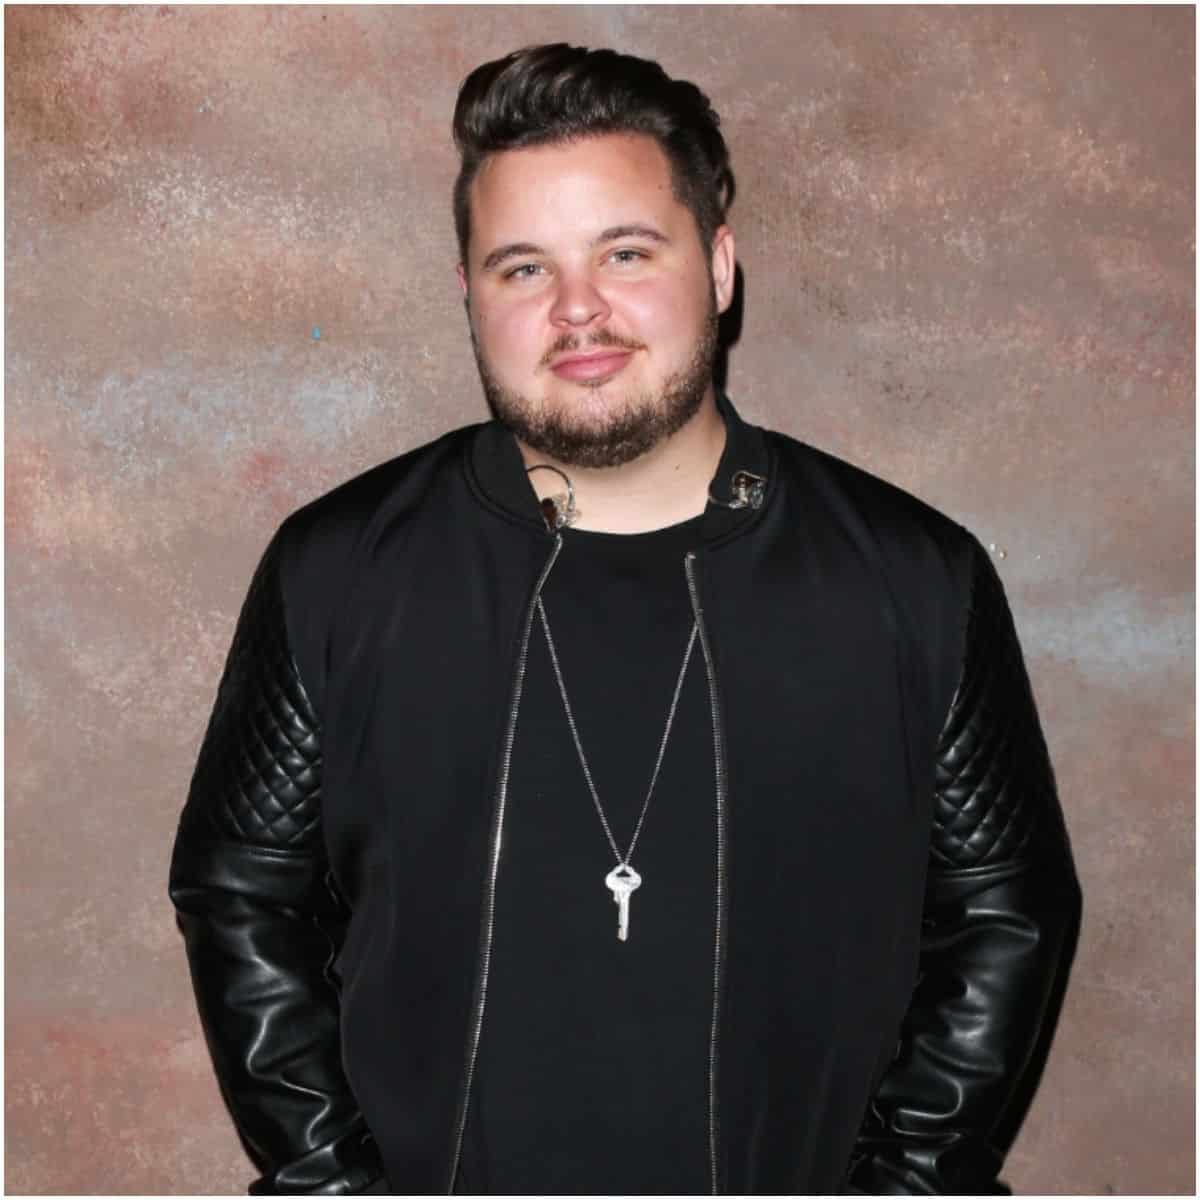 what is the net worth of Bryan Lanning